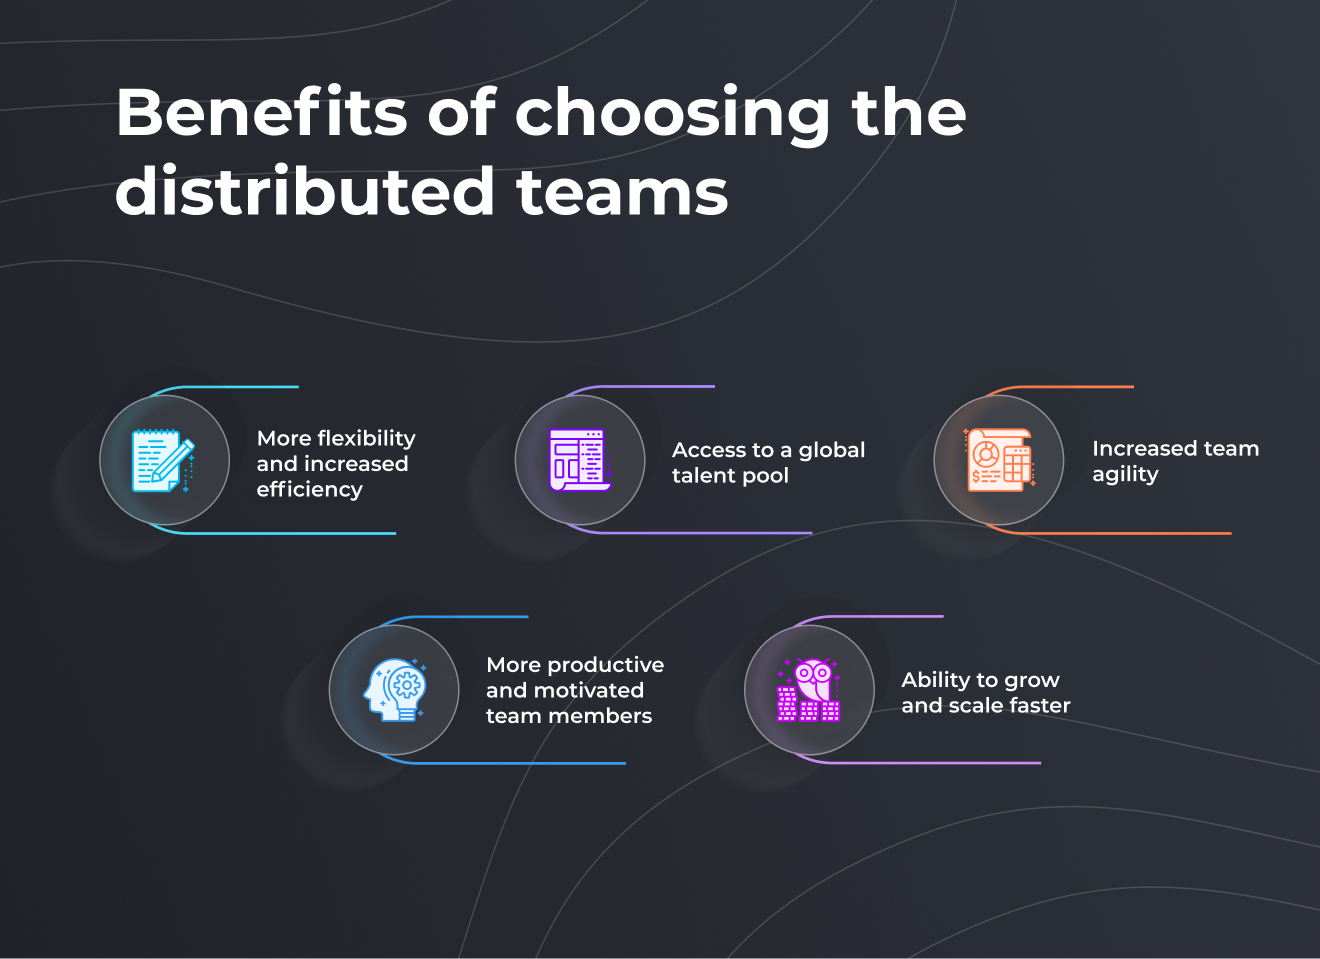 Benefits of choosing the distributed teams